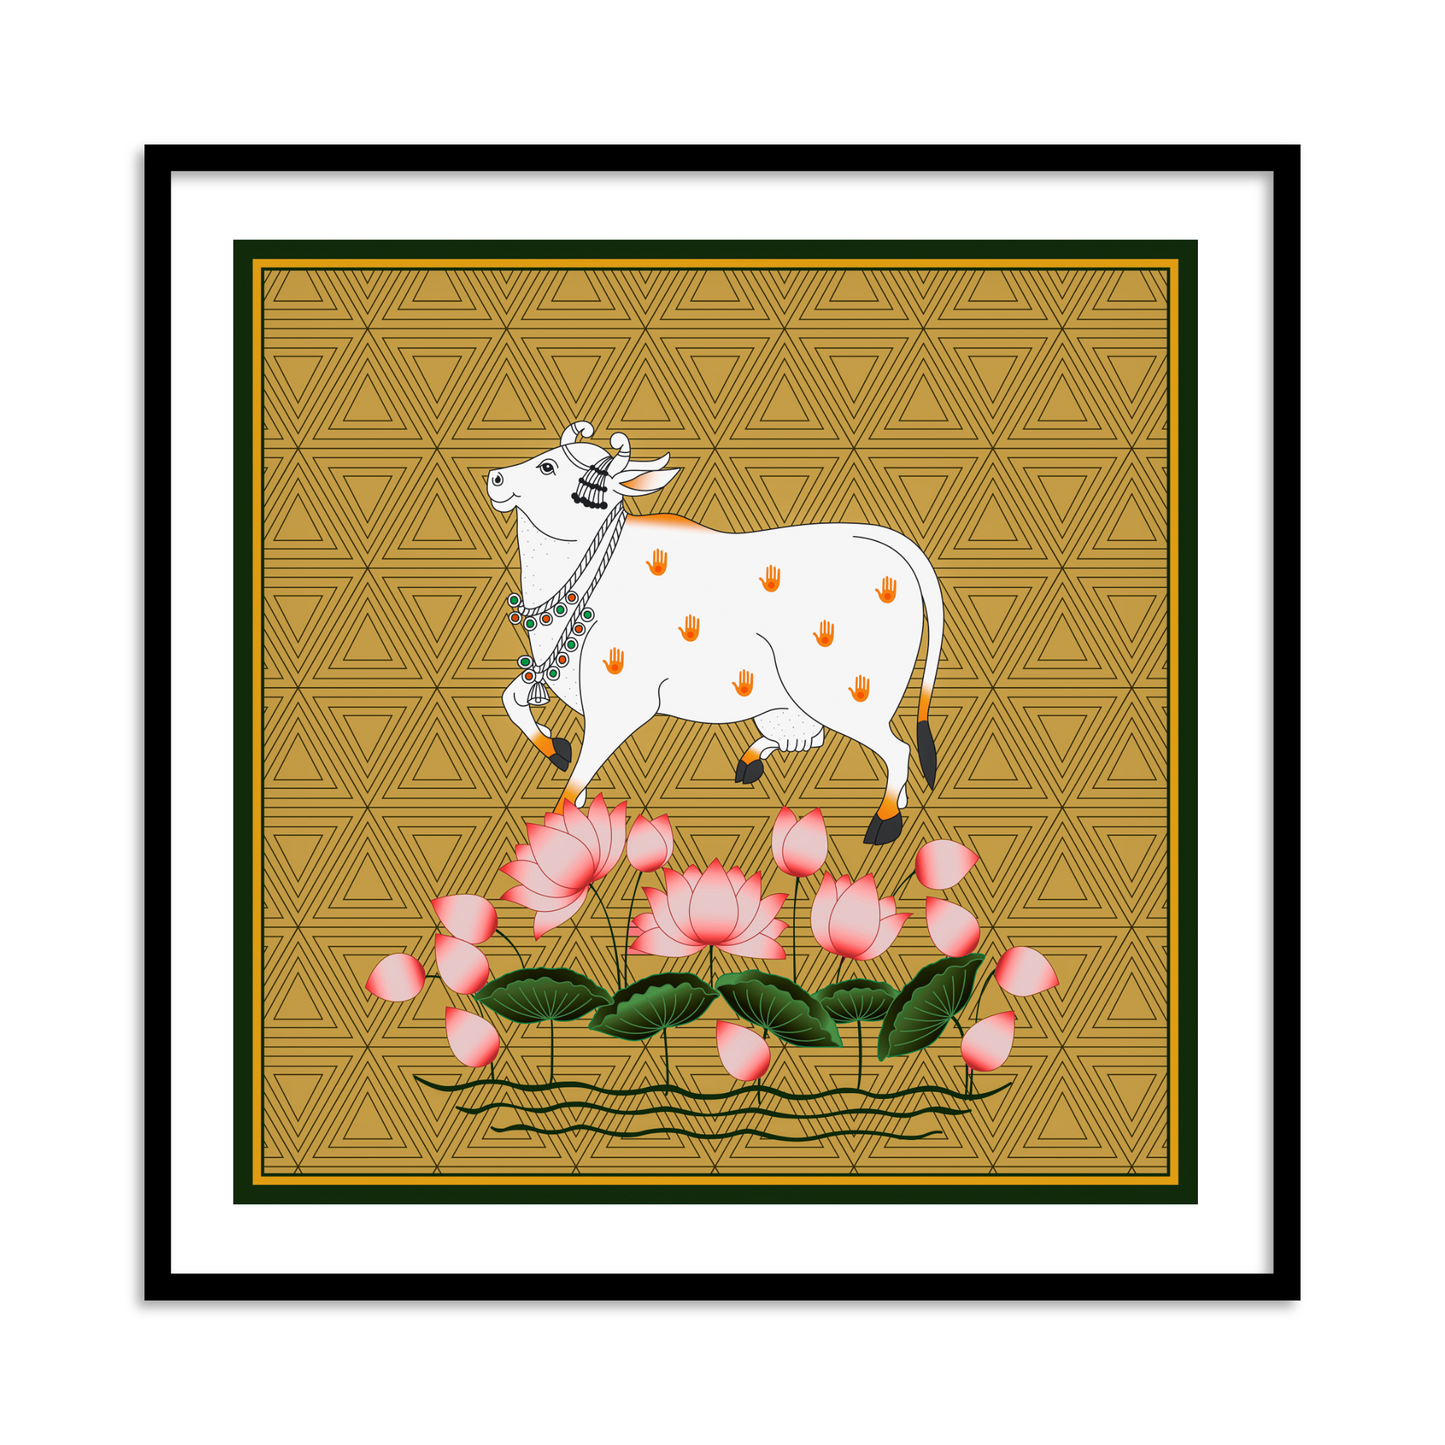 Shri Nath ji Devoted Cow Pichwai Traditional Painting | Indian Pichwai Painting Wall Art